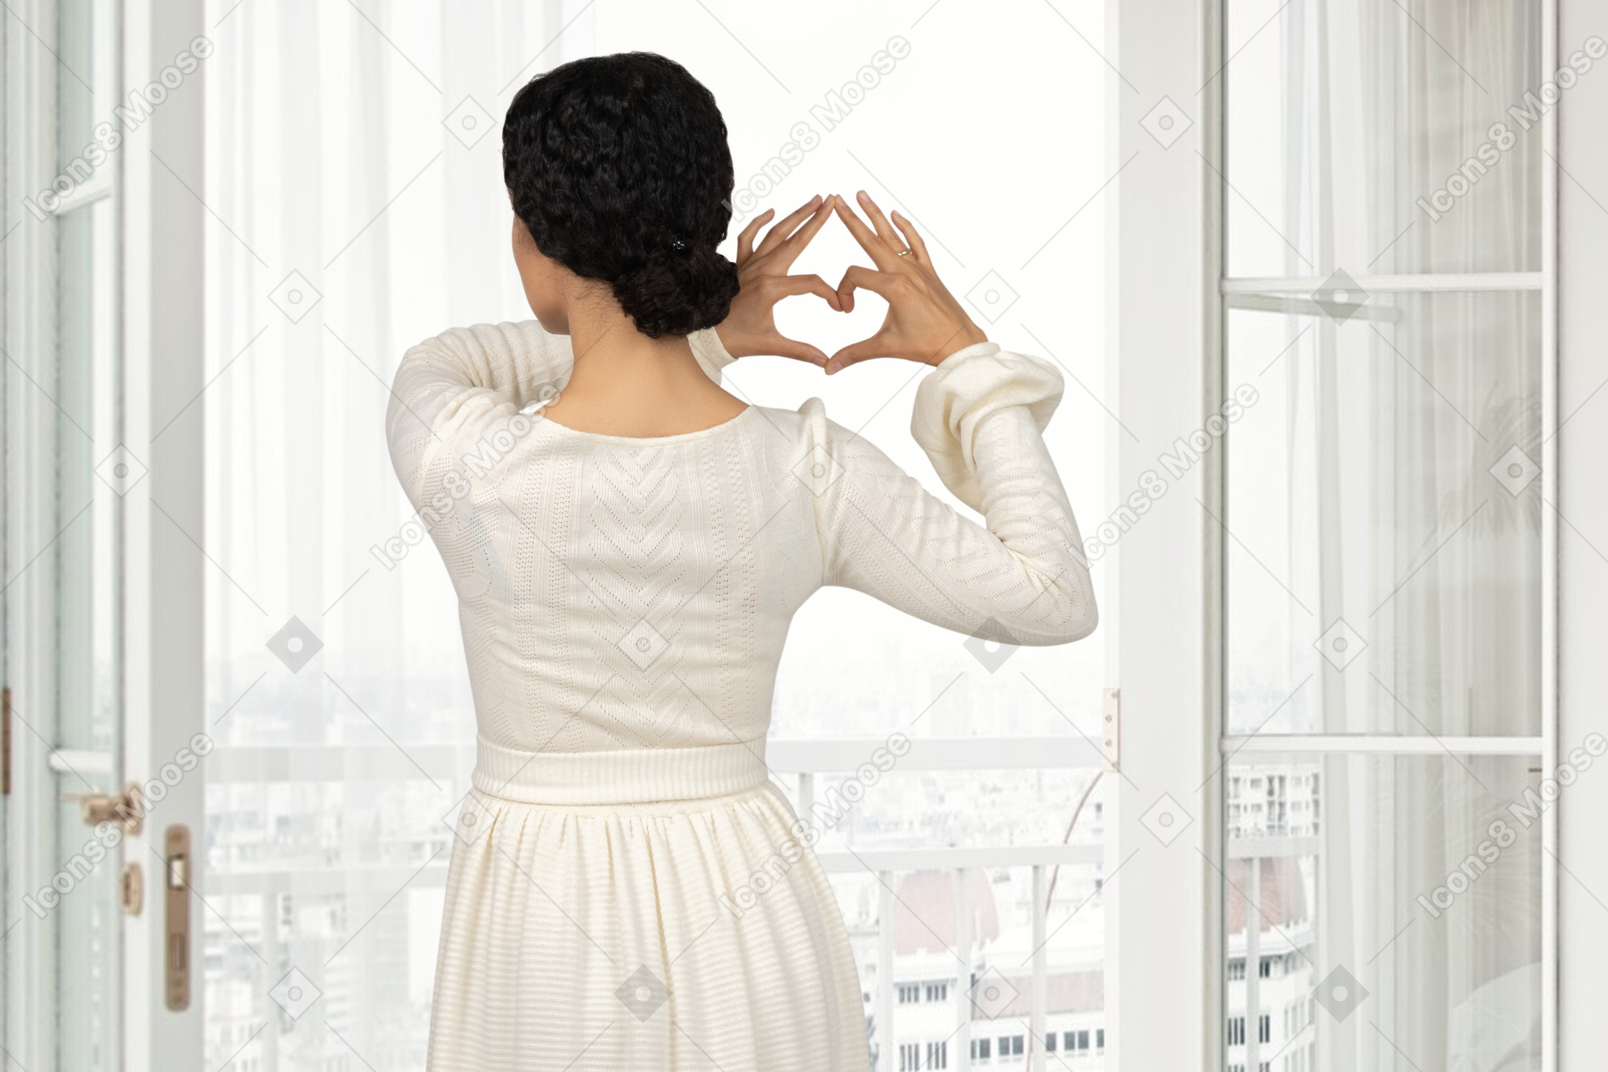 Woman near the window showing heart with her hands